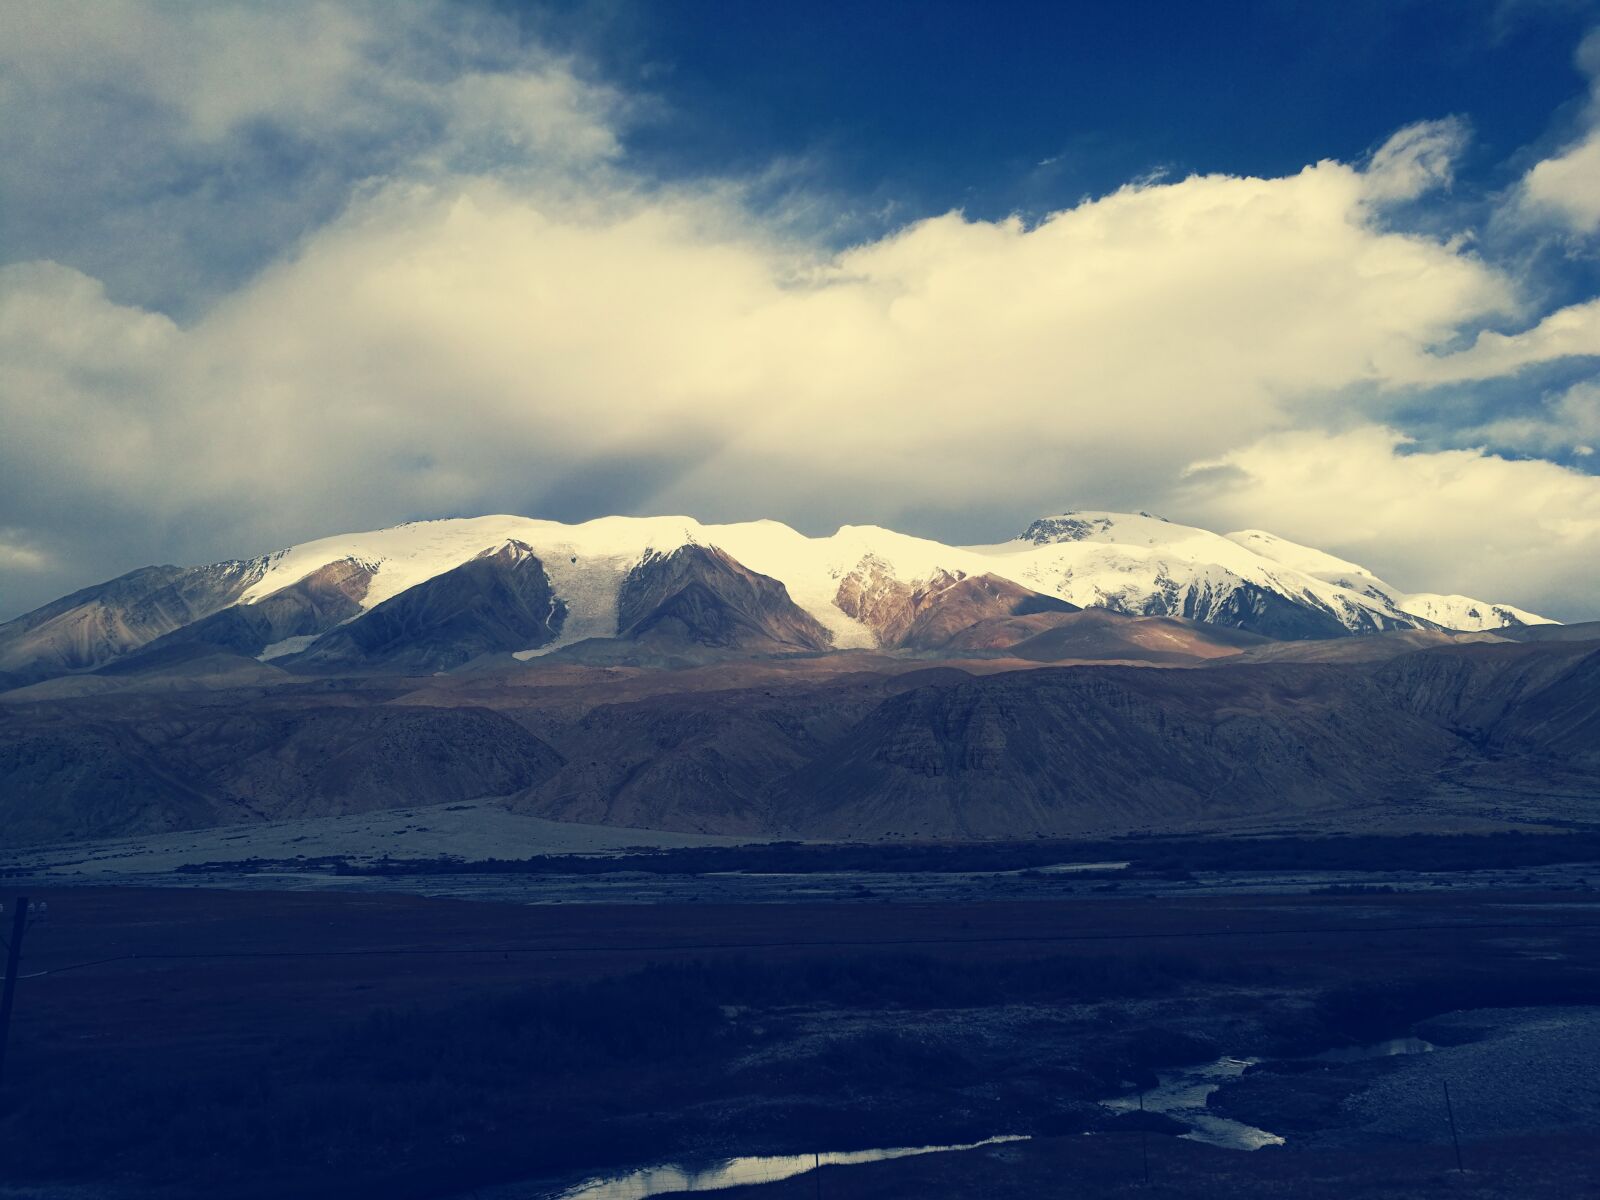 HUAWEI Honor 8 sample photo. The pamirs, snow mountain photography